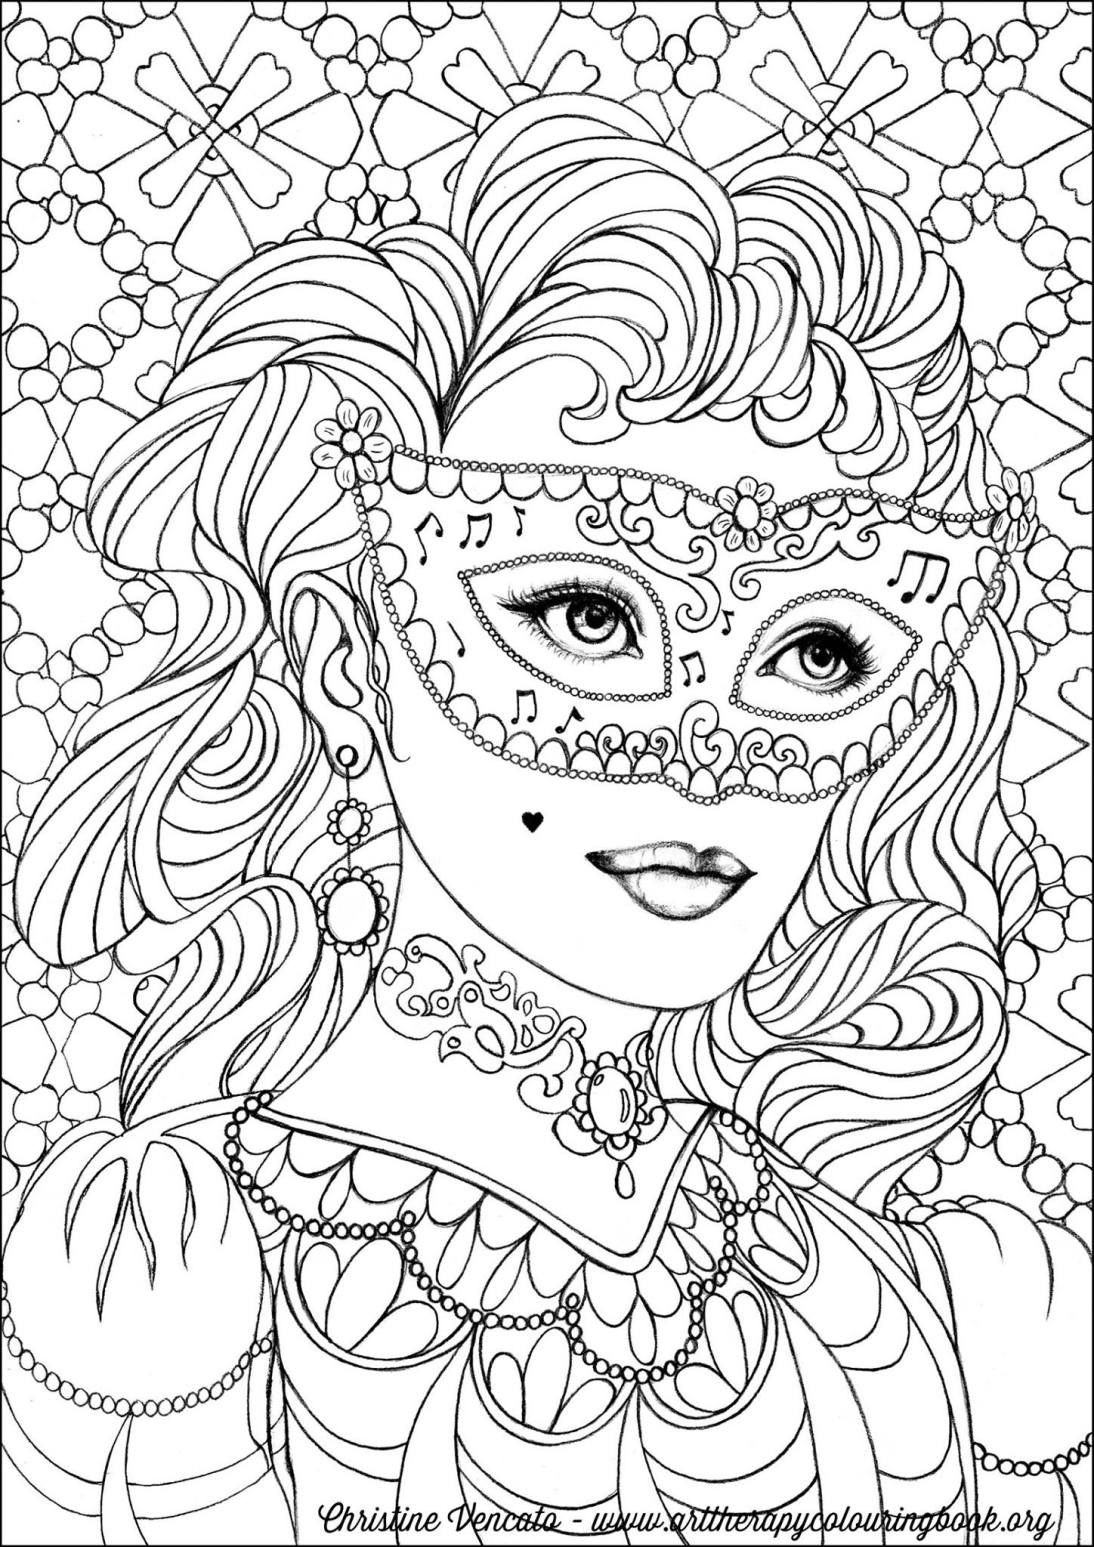 Adult Coloring Book Pictures
 Free Coloring Page From Adult Coloring Worldwide Art by